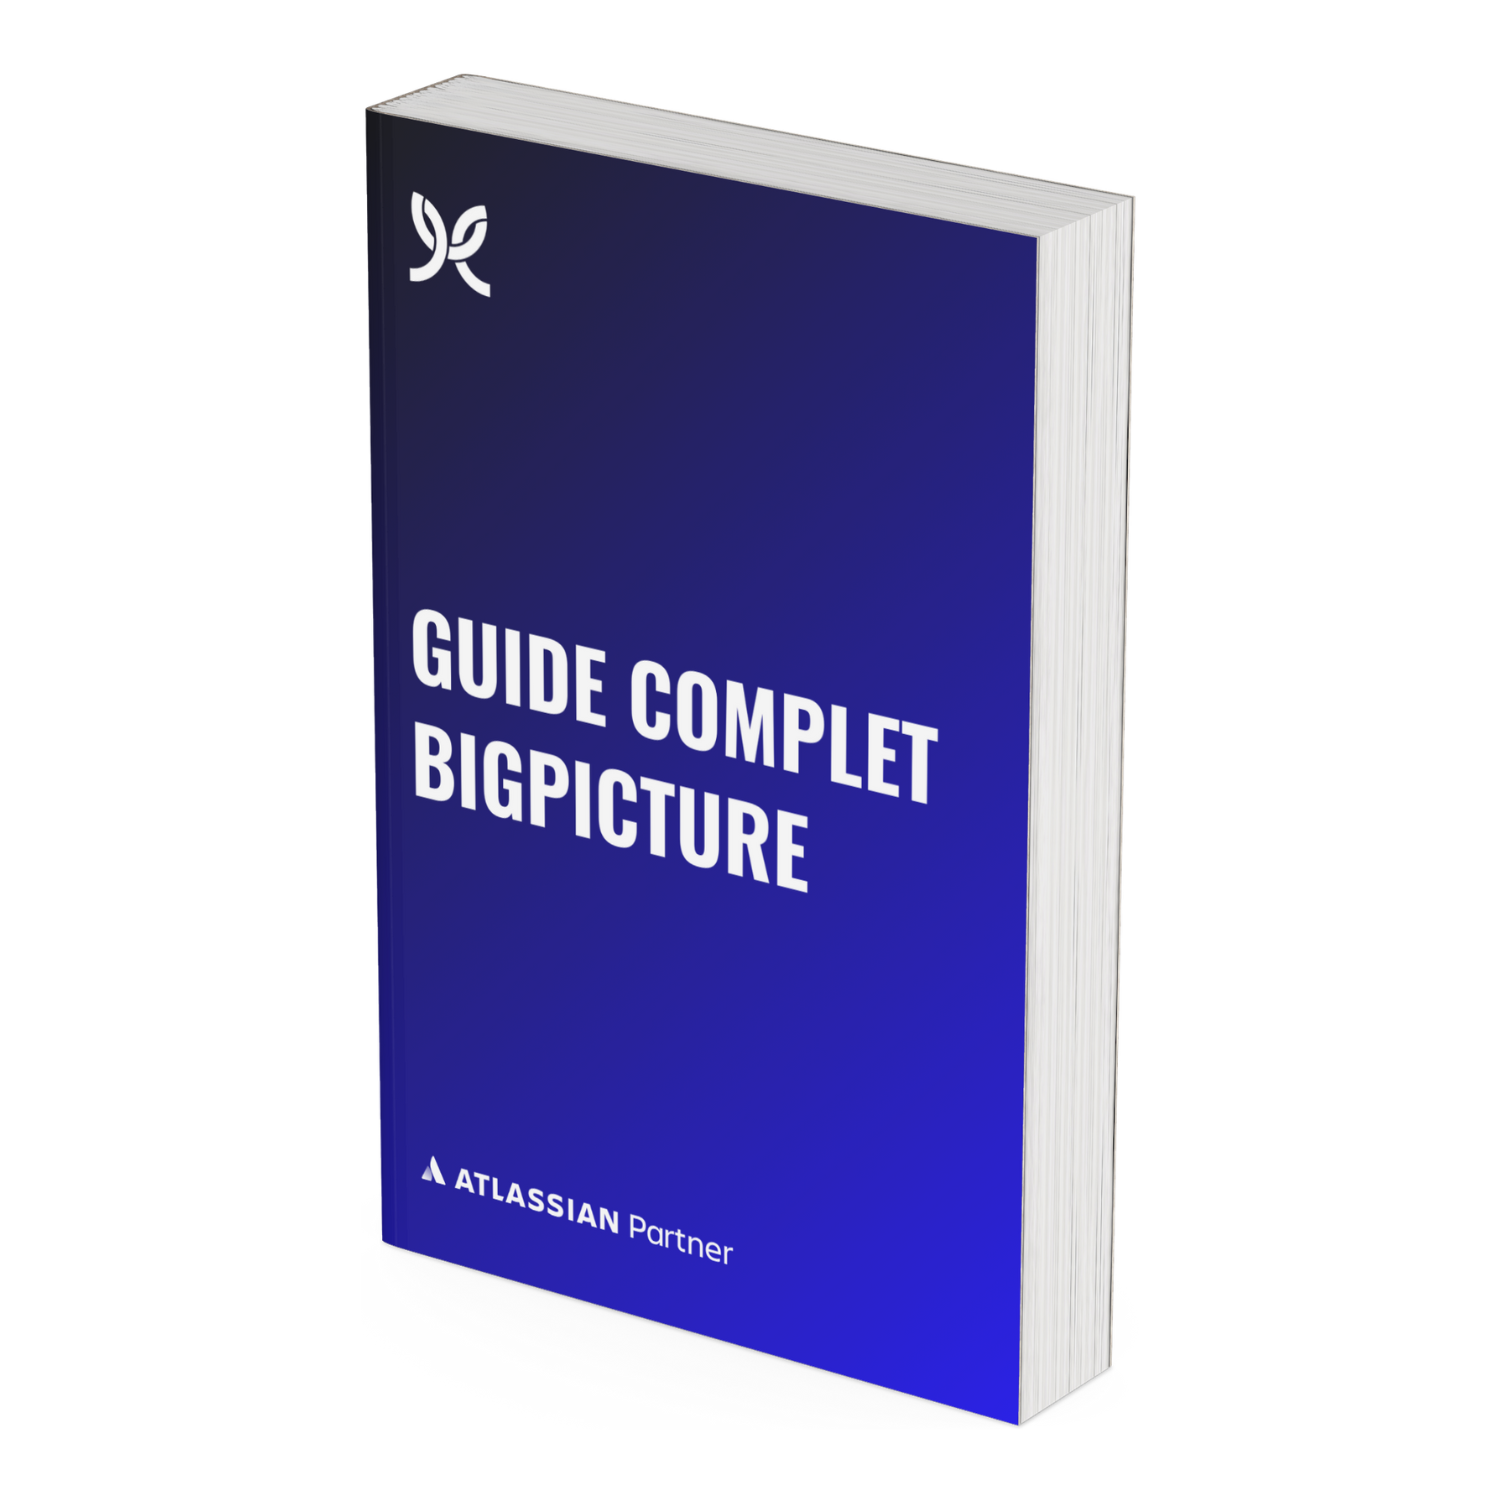 Guide Complet BigPicture